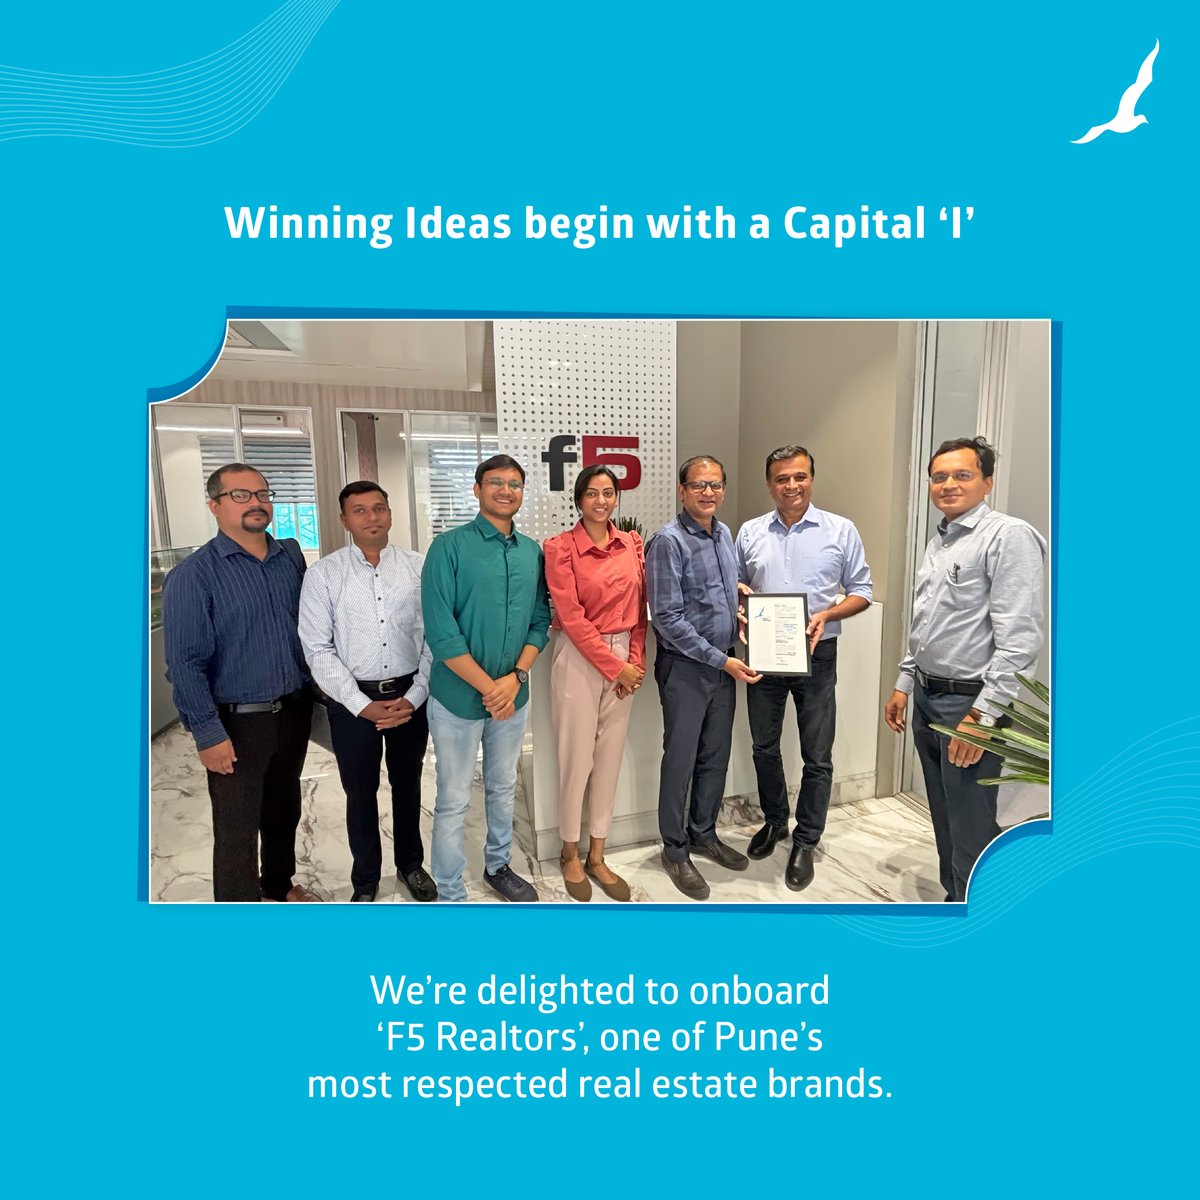 We’re delighted to onboard ‘F5 Realtors’ for their landmark project ‘The Capital’. We’re confident that with Seagull as their strategic communications partner, every new idea will soar higher than ever.
#SeagullAdvertising #ClientOnboarding #Collaboration #GrowBetter